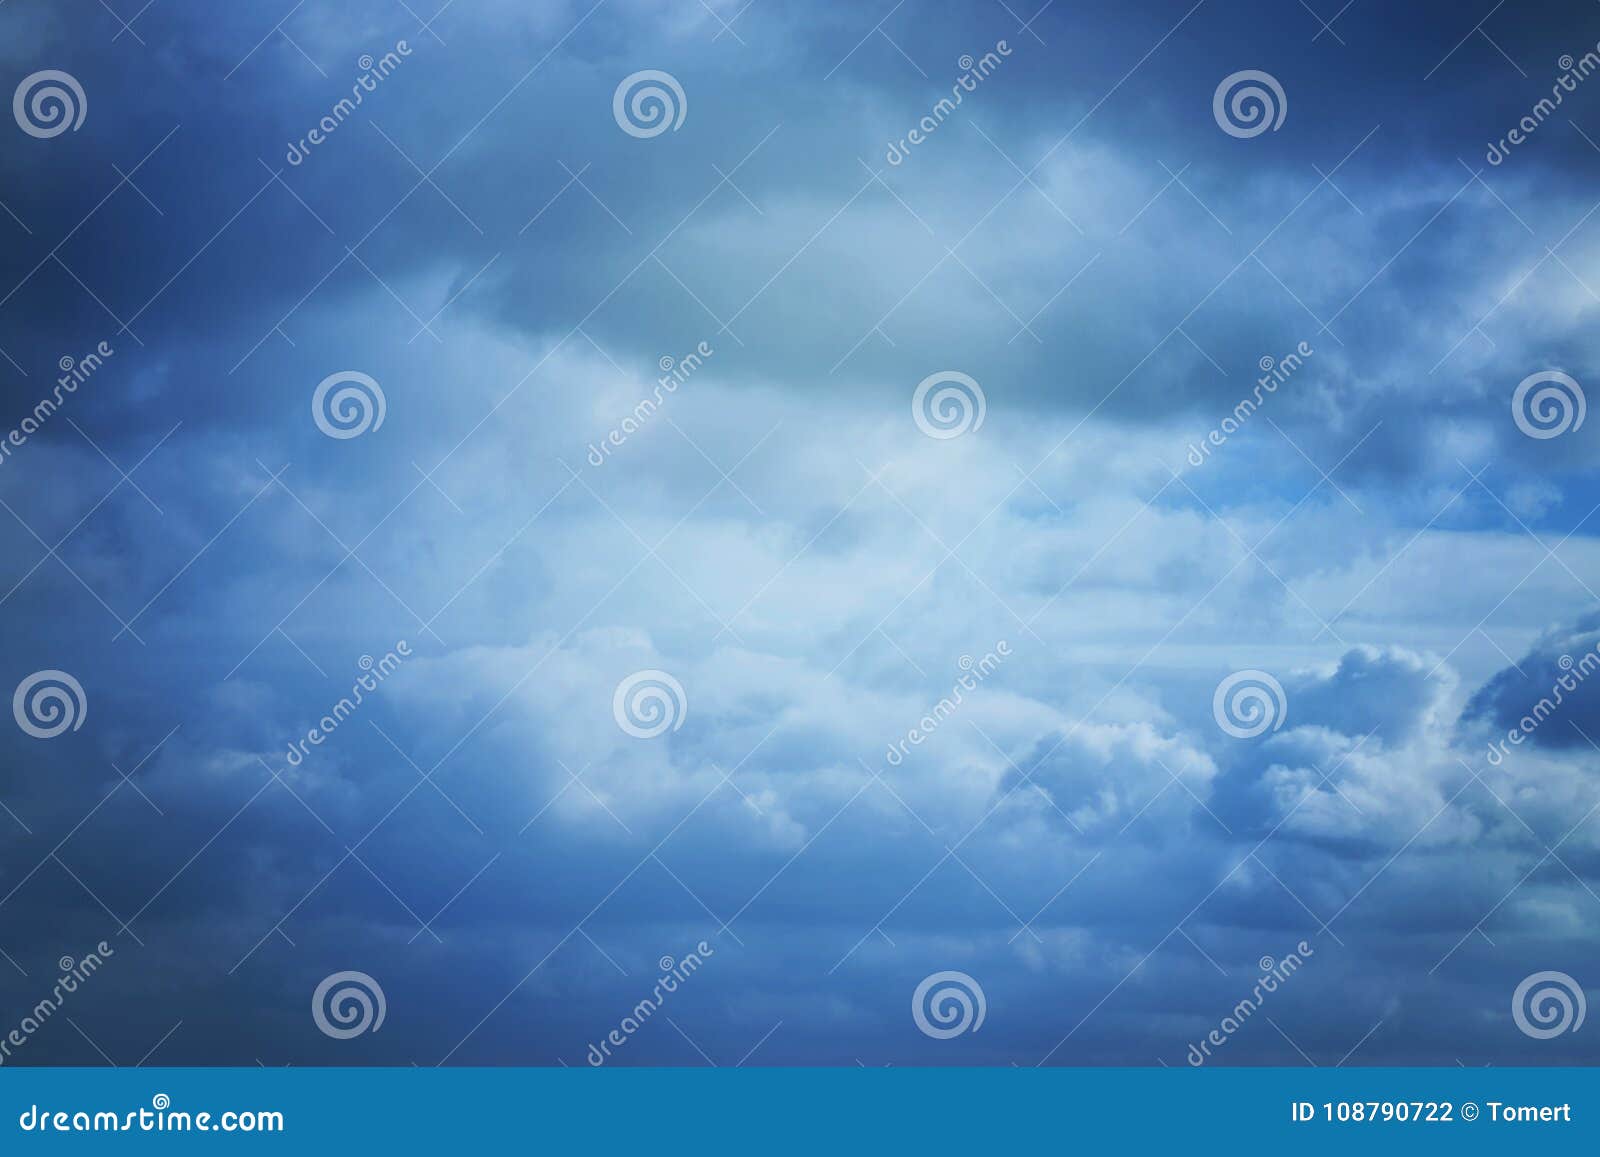 A Soft Cloud Background With A Blue Pastel Colors Moon And Dreamy Concept Stock Photo Image Of Dusk Cloud 108790722 #blue #blue aesthetic #blue things #blue pastel #blue sky #sky #blue grunge #blue blog #blue tumblr #legs #grunge #pale #clouds. dreamstime com